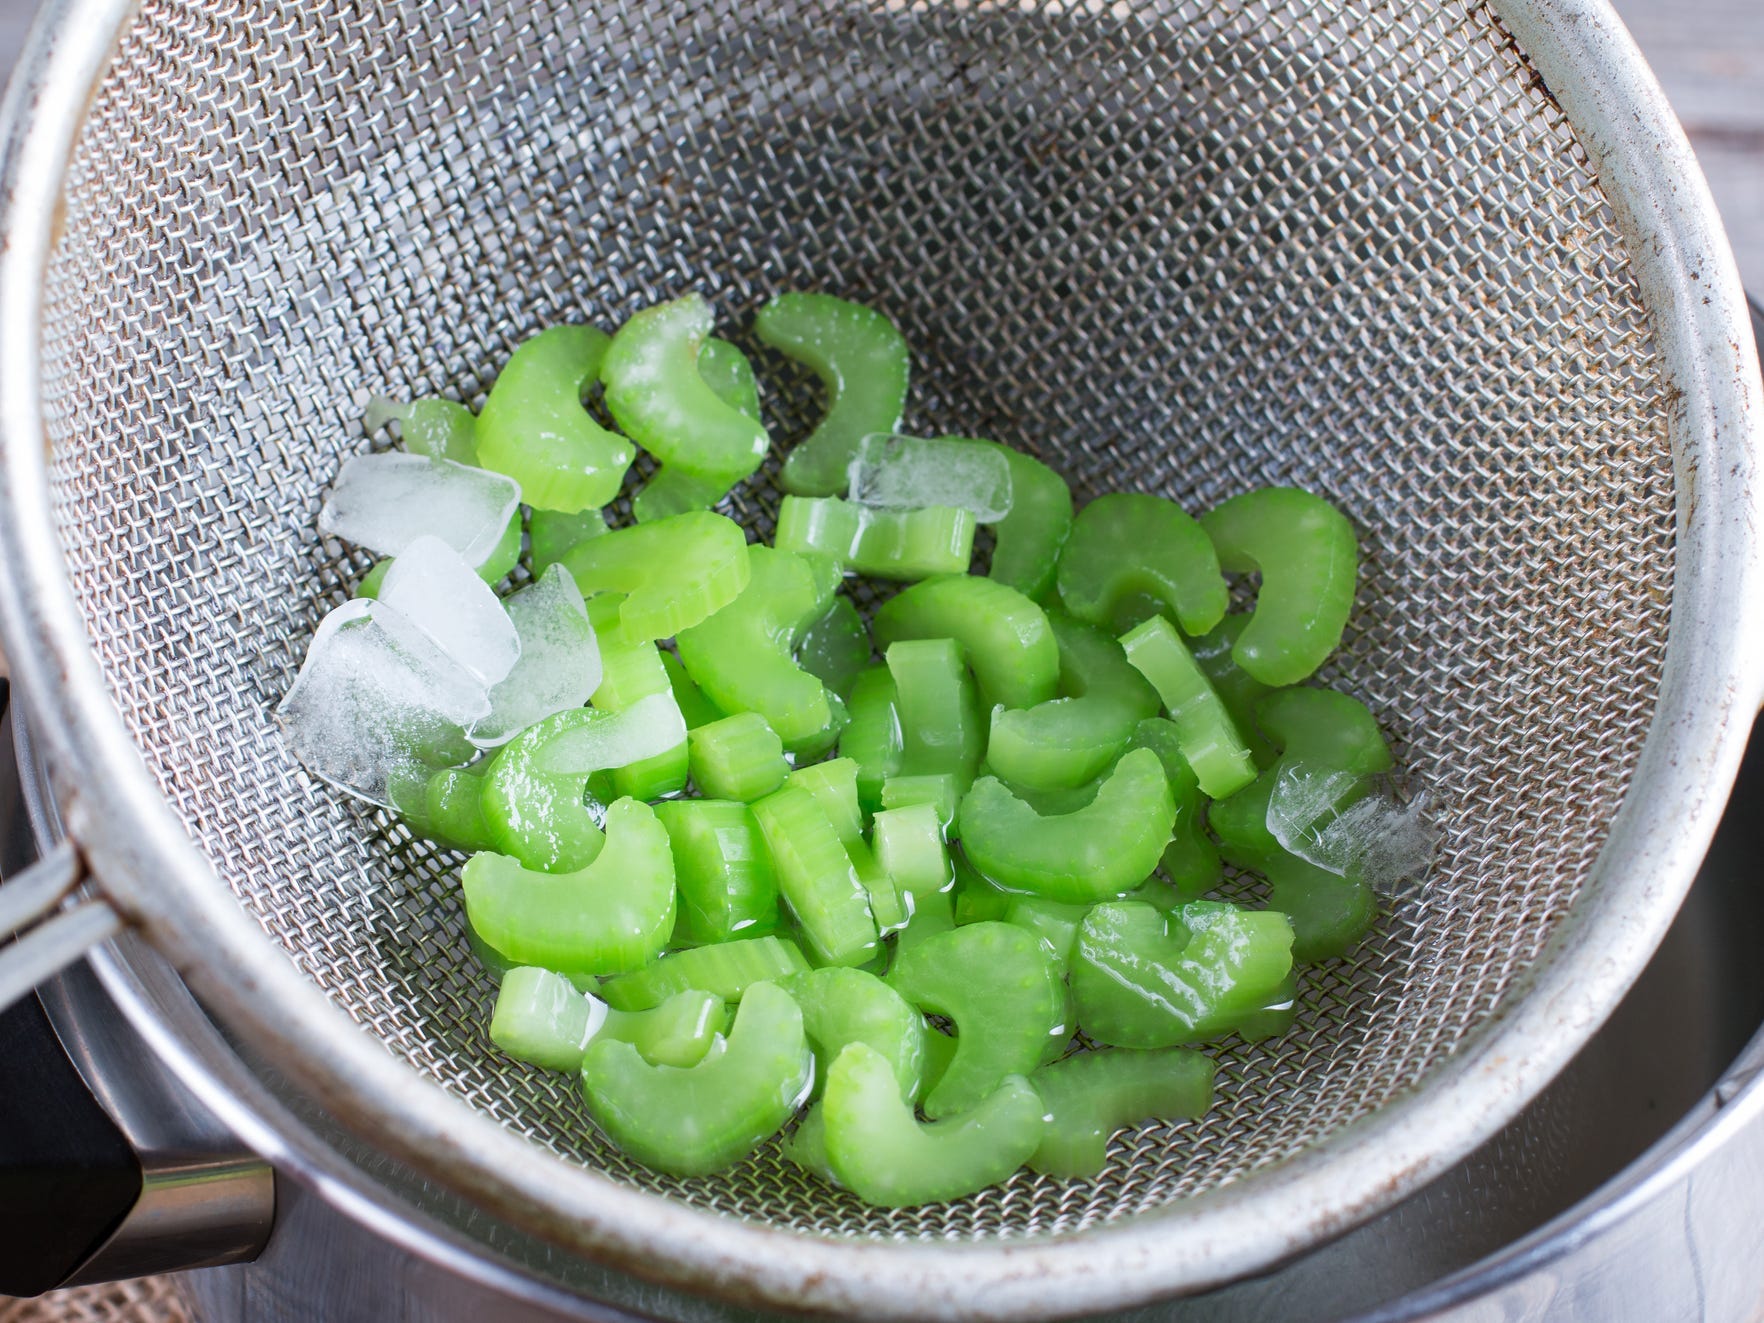 Blanched celery in a strainer with some ice